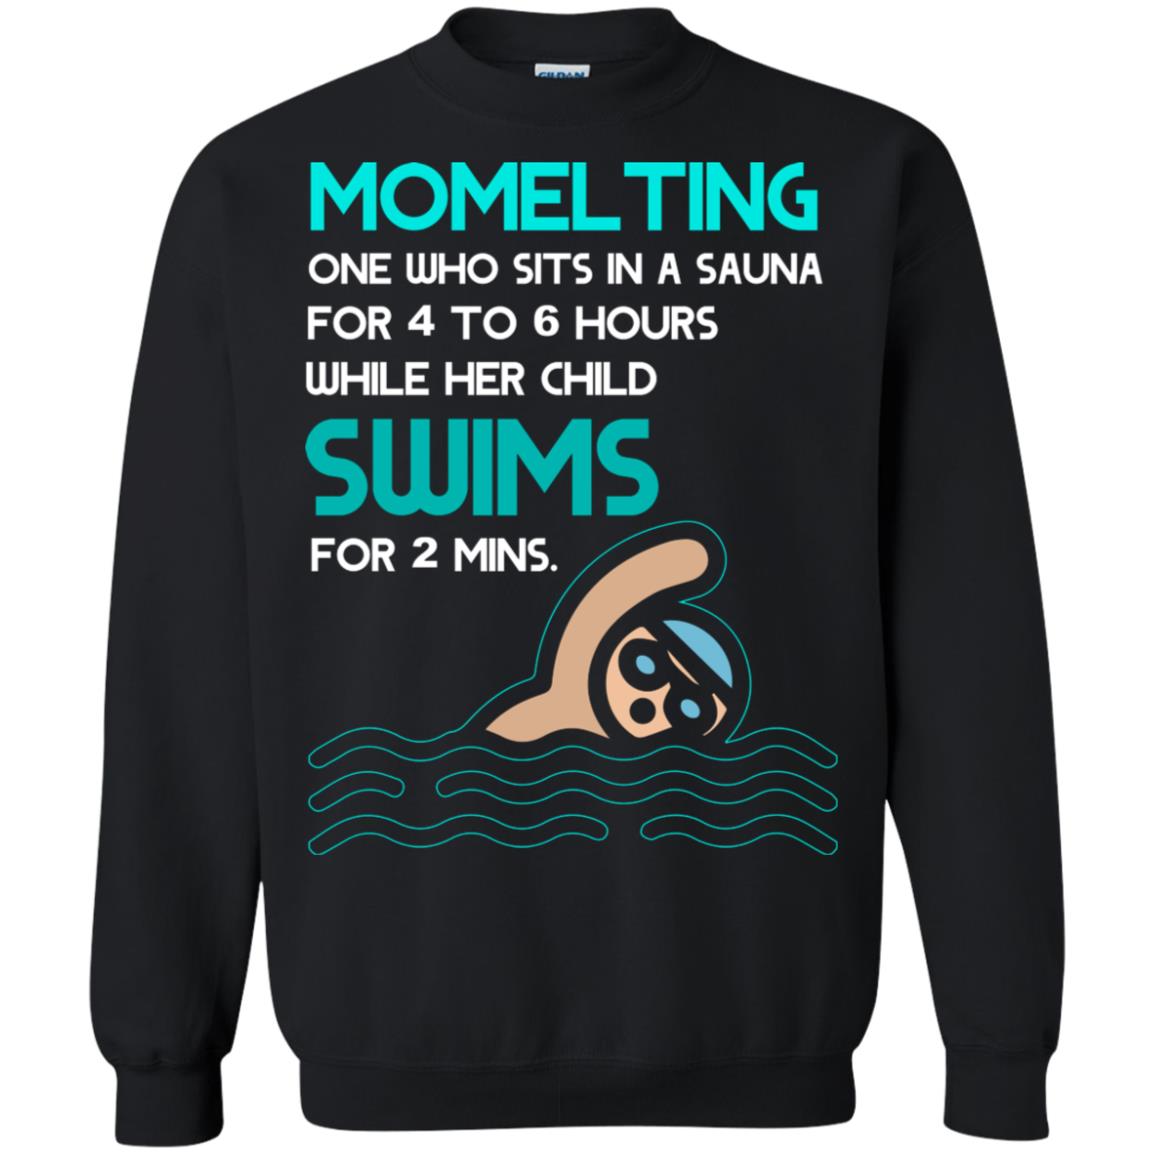 Momelting One Who Sits In A Sauna For 4 To 6 Hours  While Her Child Swims For 2 Mins ShirtG180 Gildan Crewneck Pullover Sweatshirt 8 oz.